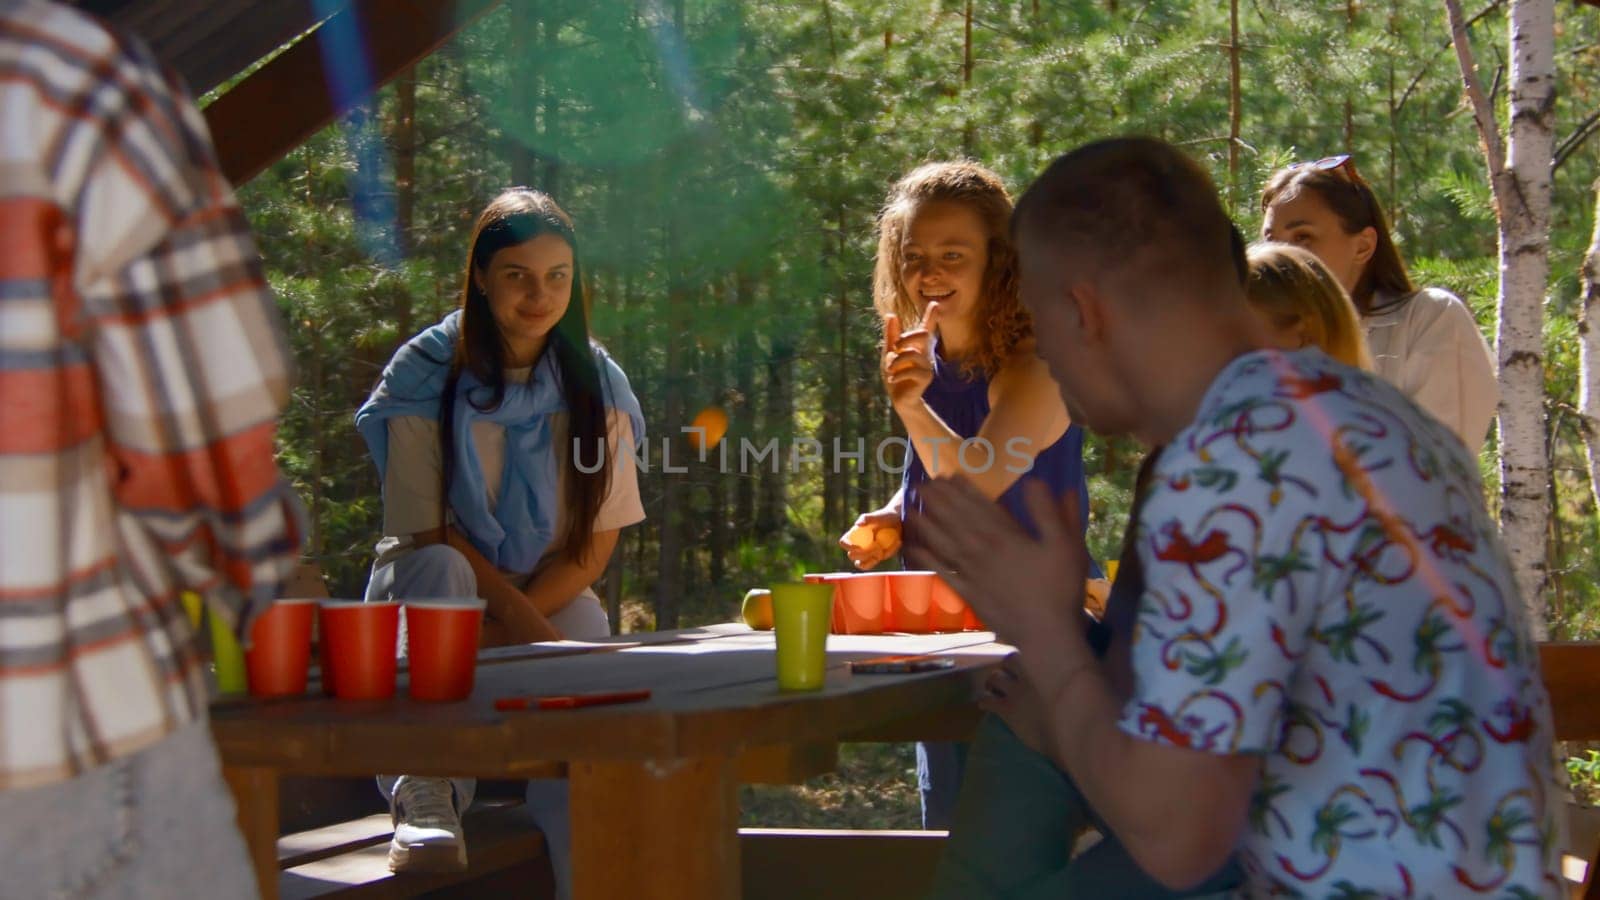 Woman plays beer pong. Stock footage. Beautiful young woman wins at beer pong. Friends rejoice at victory in beer pong in nature in summer.